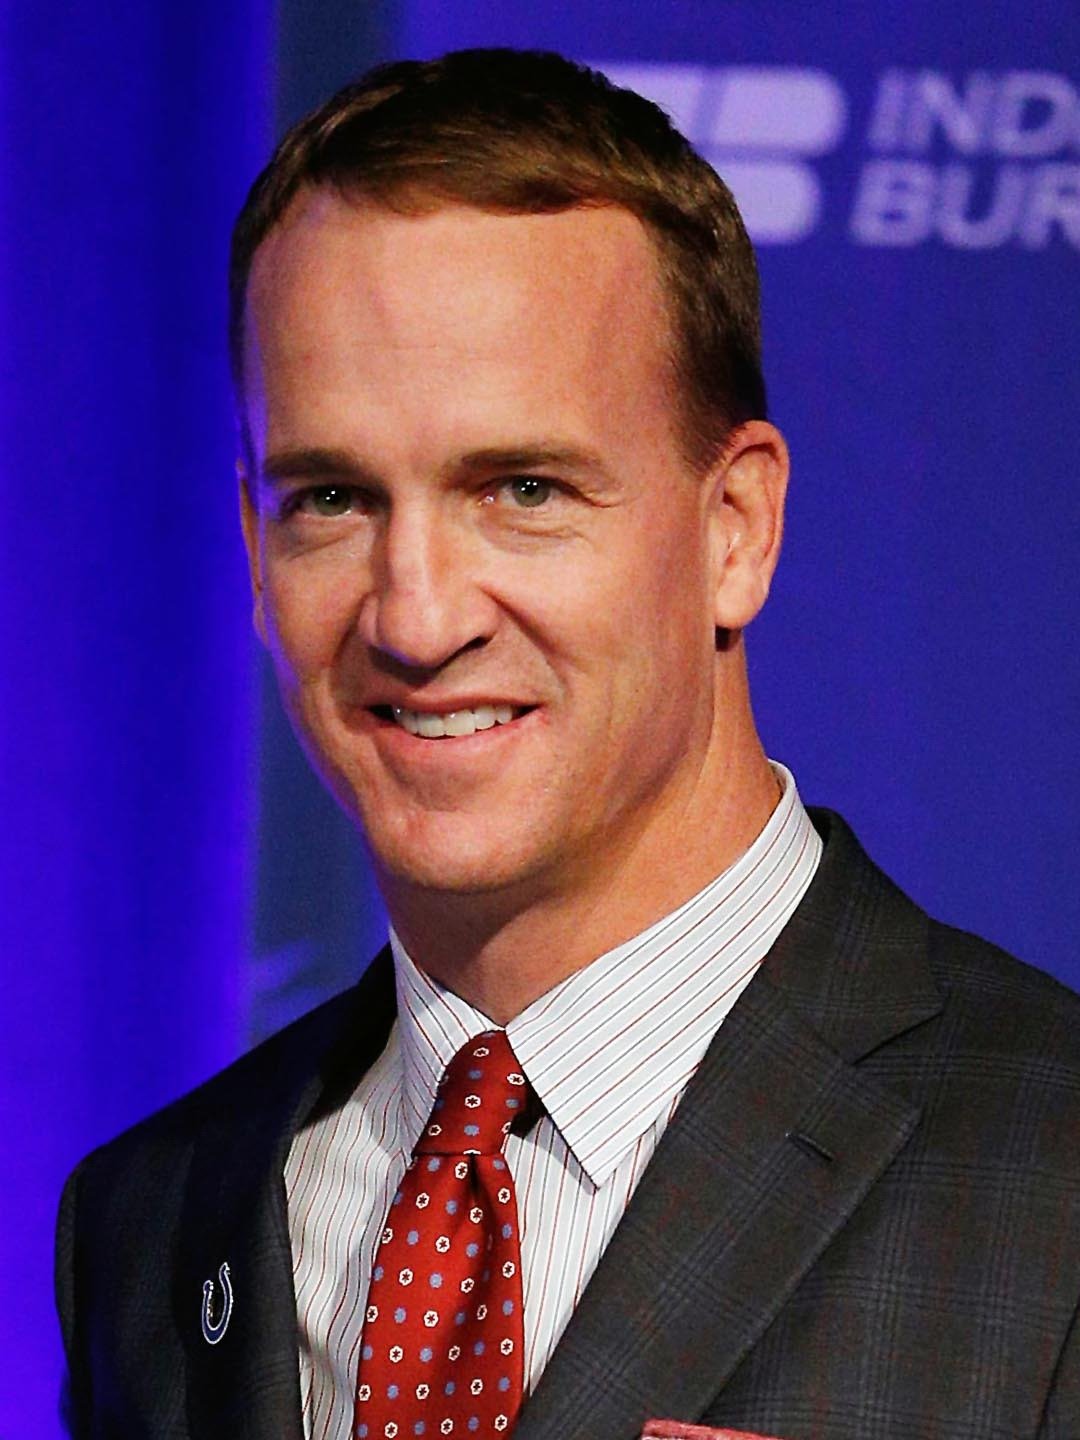 How tall is Peyton Manning?